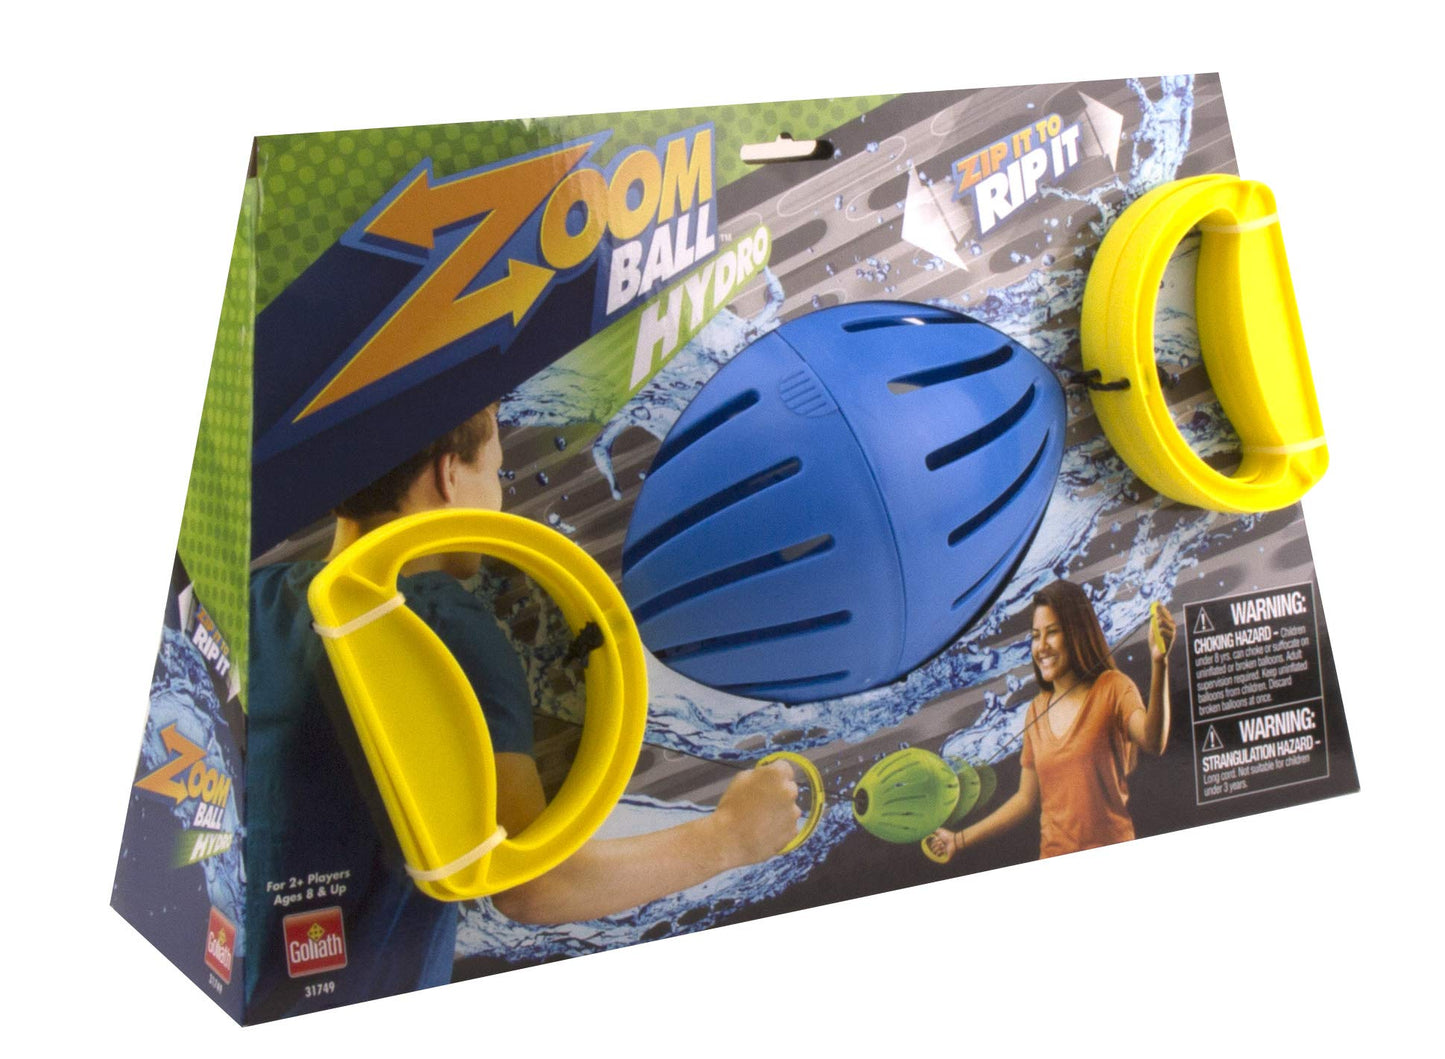 WAHU Zoom Ball Hydro Outdoor Water Ball Game with 7" Ball, 2 Handles, and 10 Water Balloons, Zip Ball Water Balloon Game for 2 Players Ages 8+, Multicolor